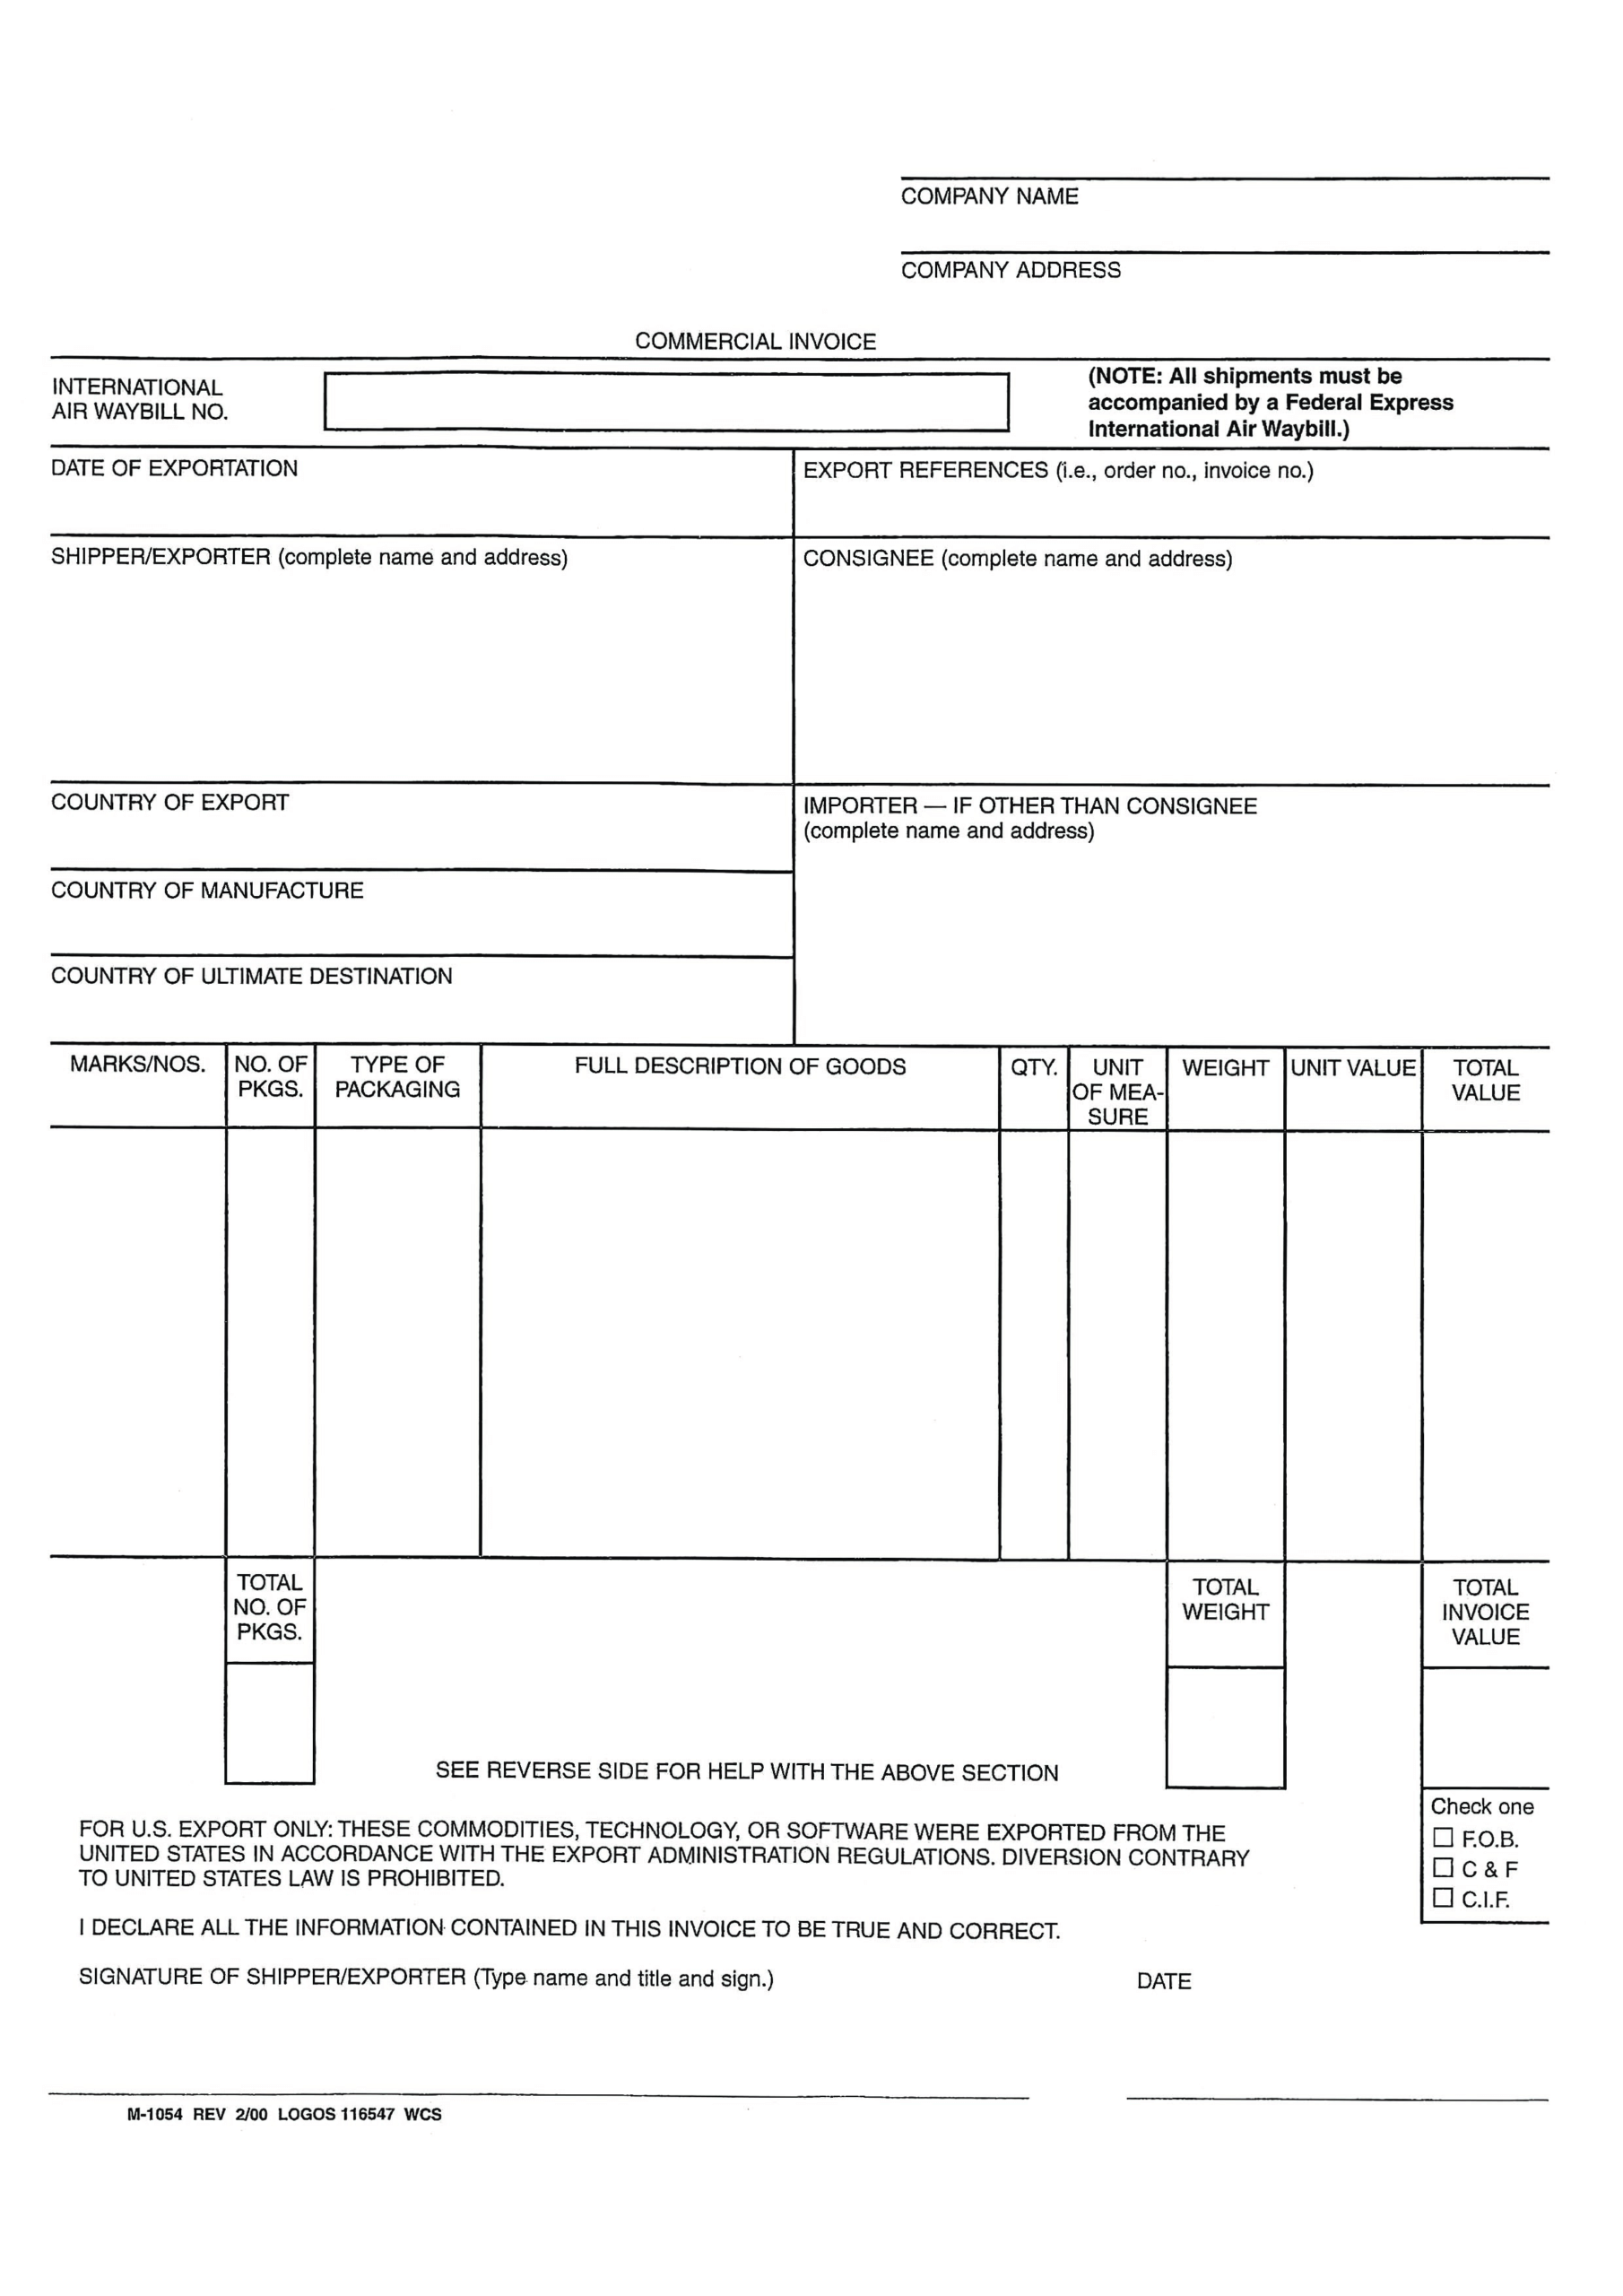 Blank Commercial Invoice Word | Templates At Regarding Commercial Invoice Template Word Doc